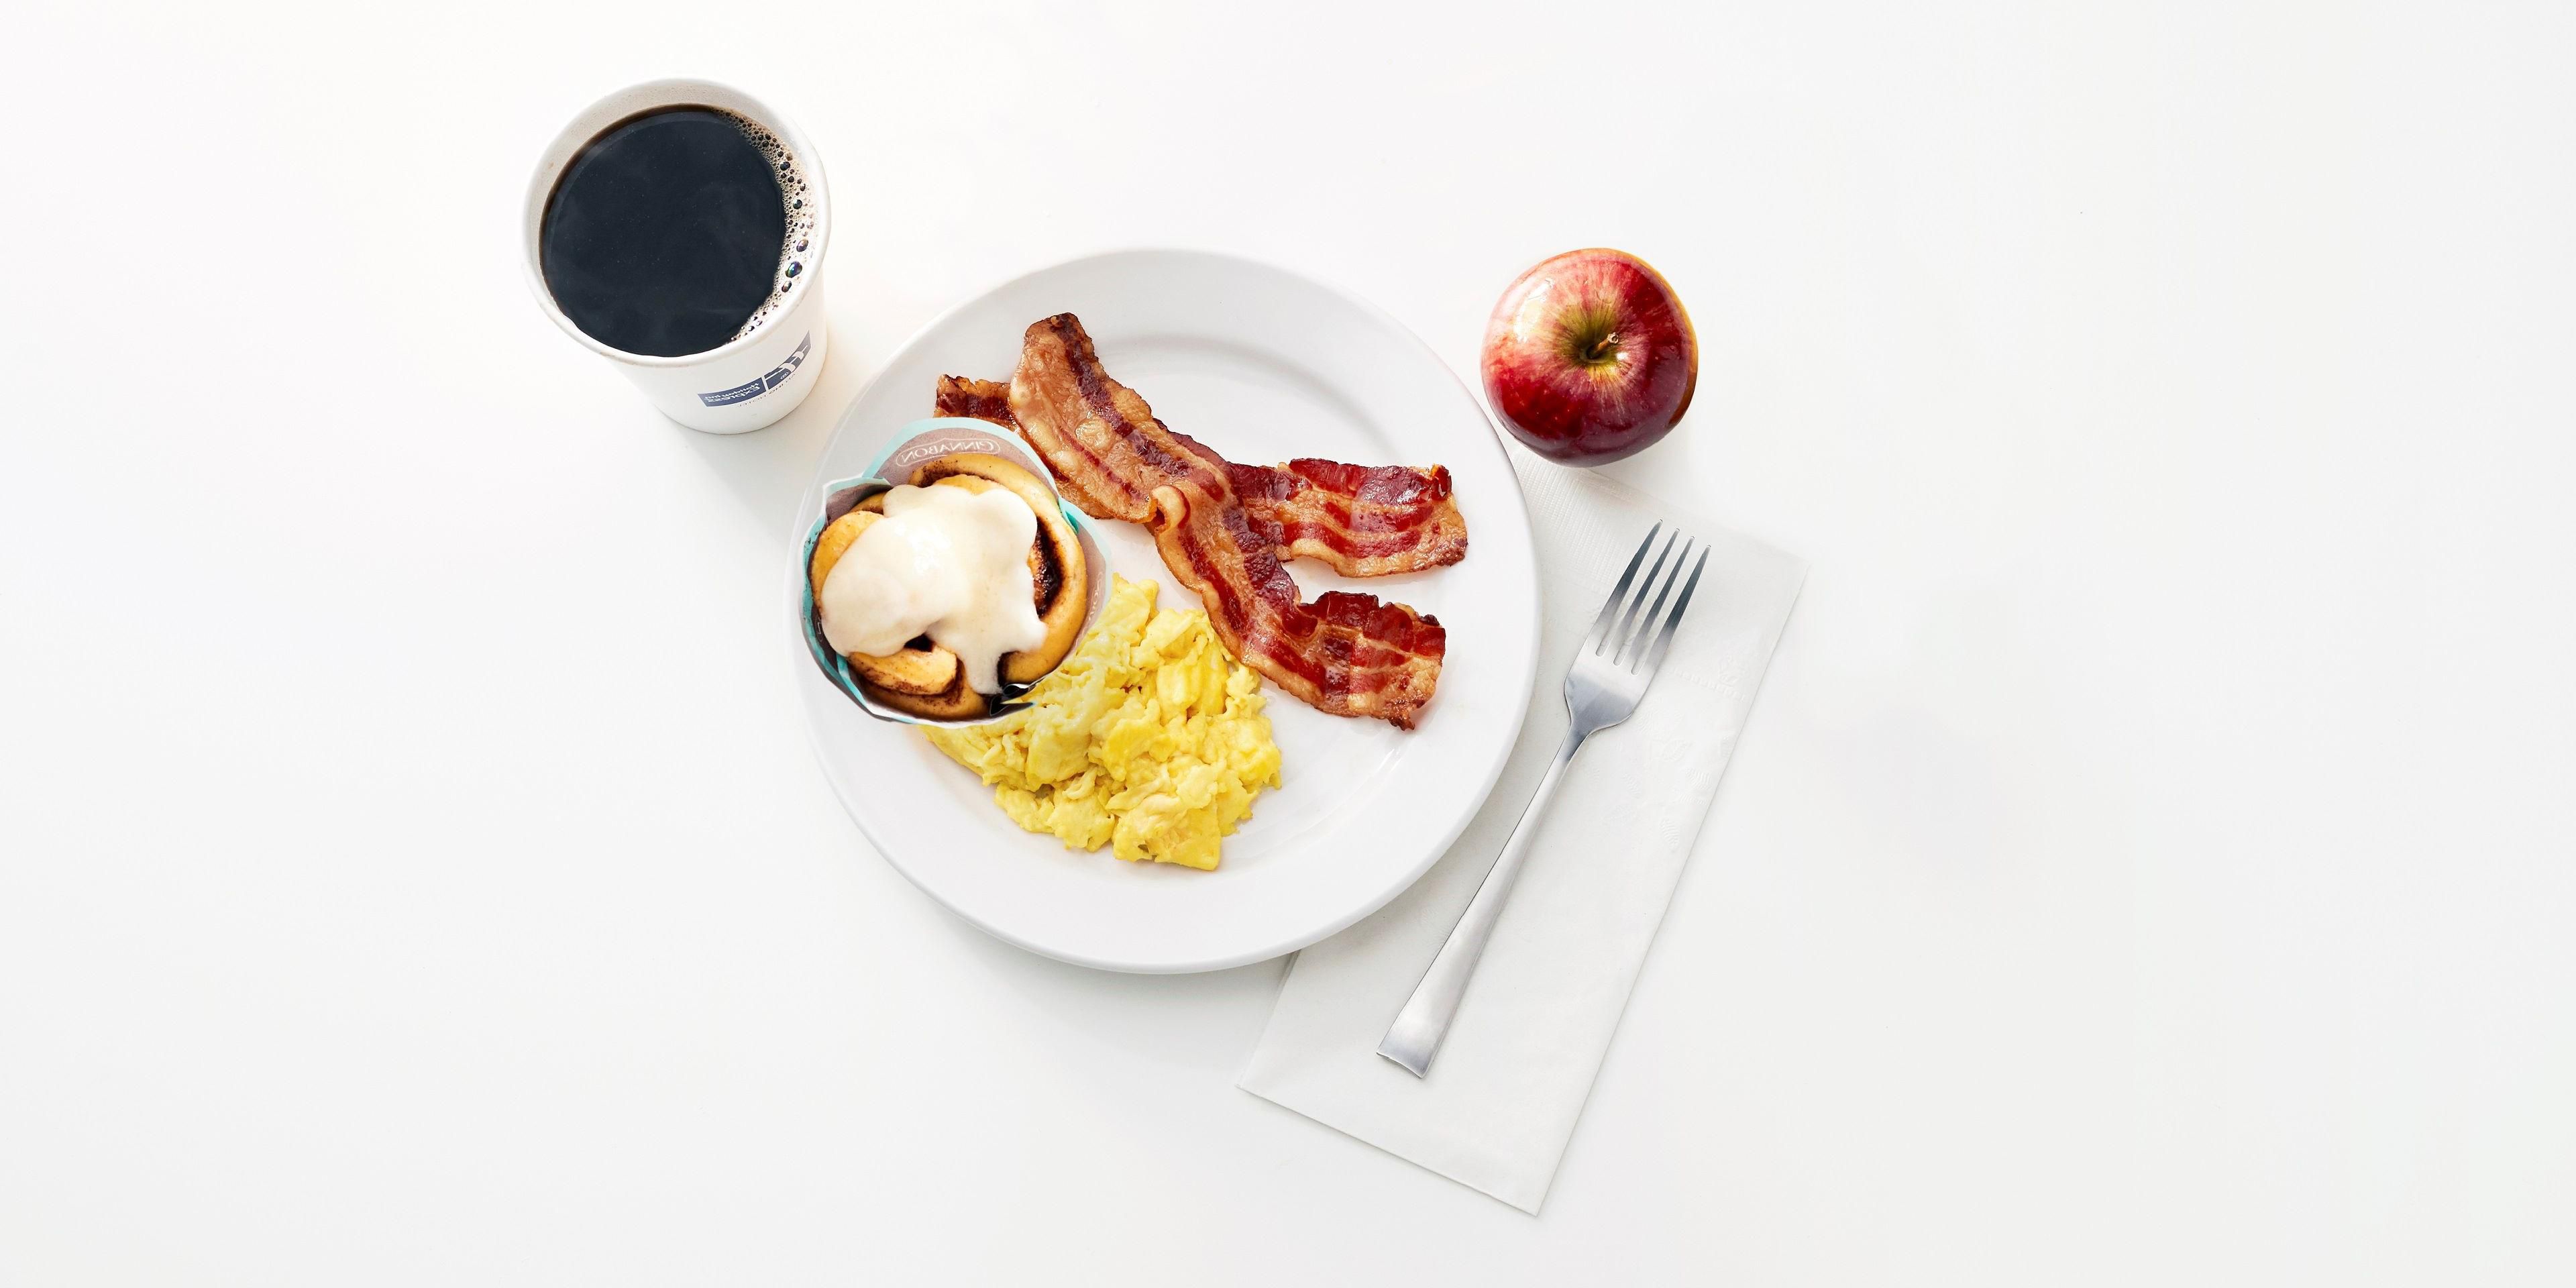 Kick start your day with our Express Start Breakfast, with grab ‘n’ go options and favorites such as eggs and bacon, hot pancakes, our signature cinnamon rolls and fresh coffee. Offered from 6:00 AM to 9:00 AM.